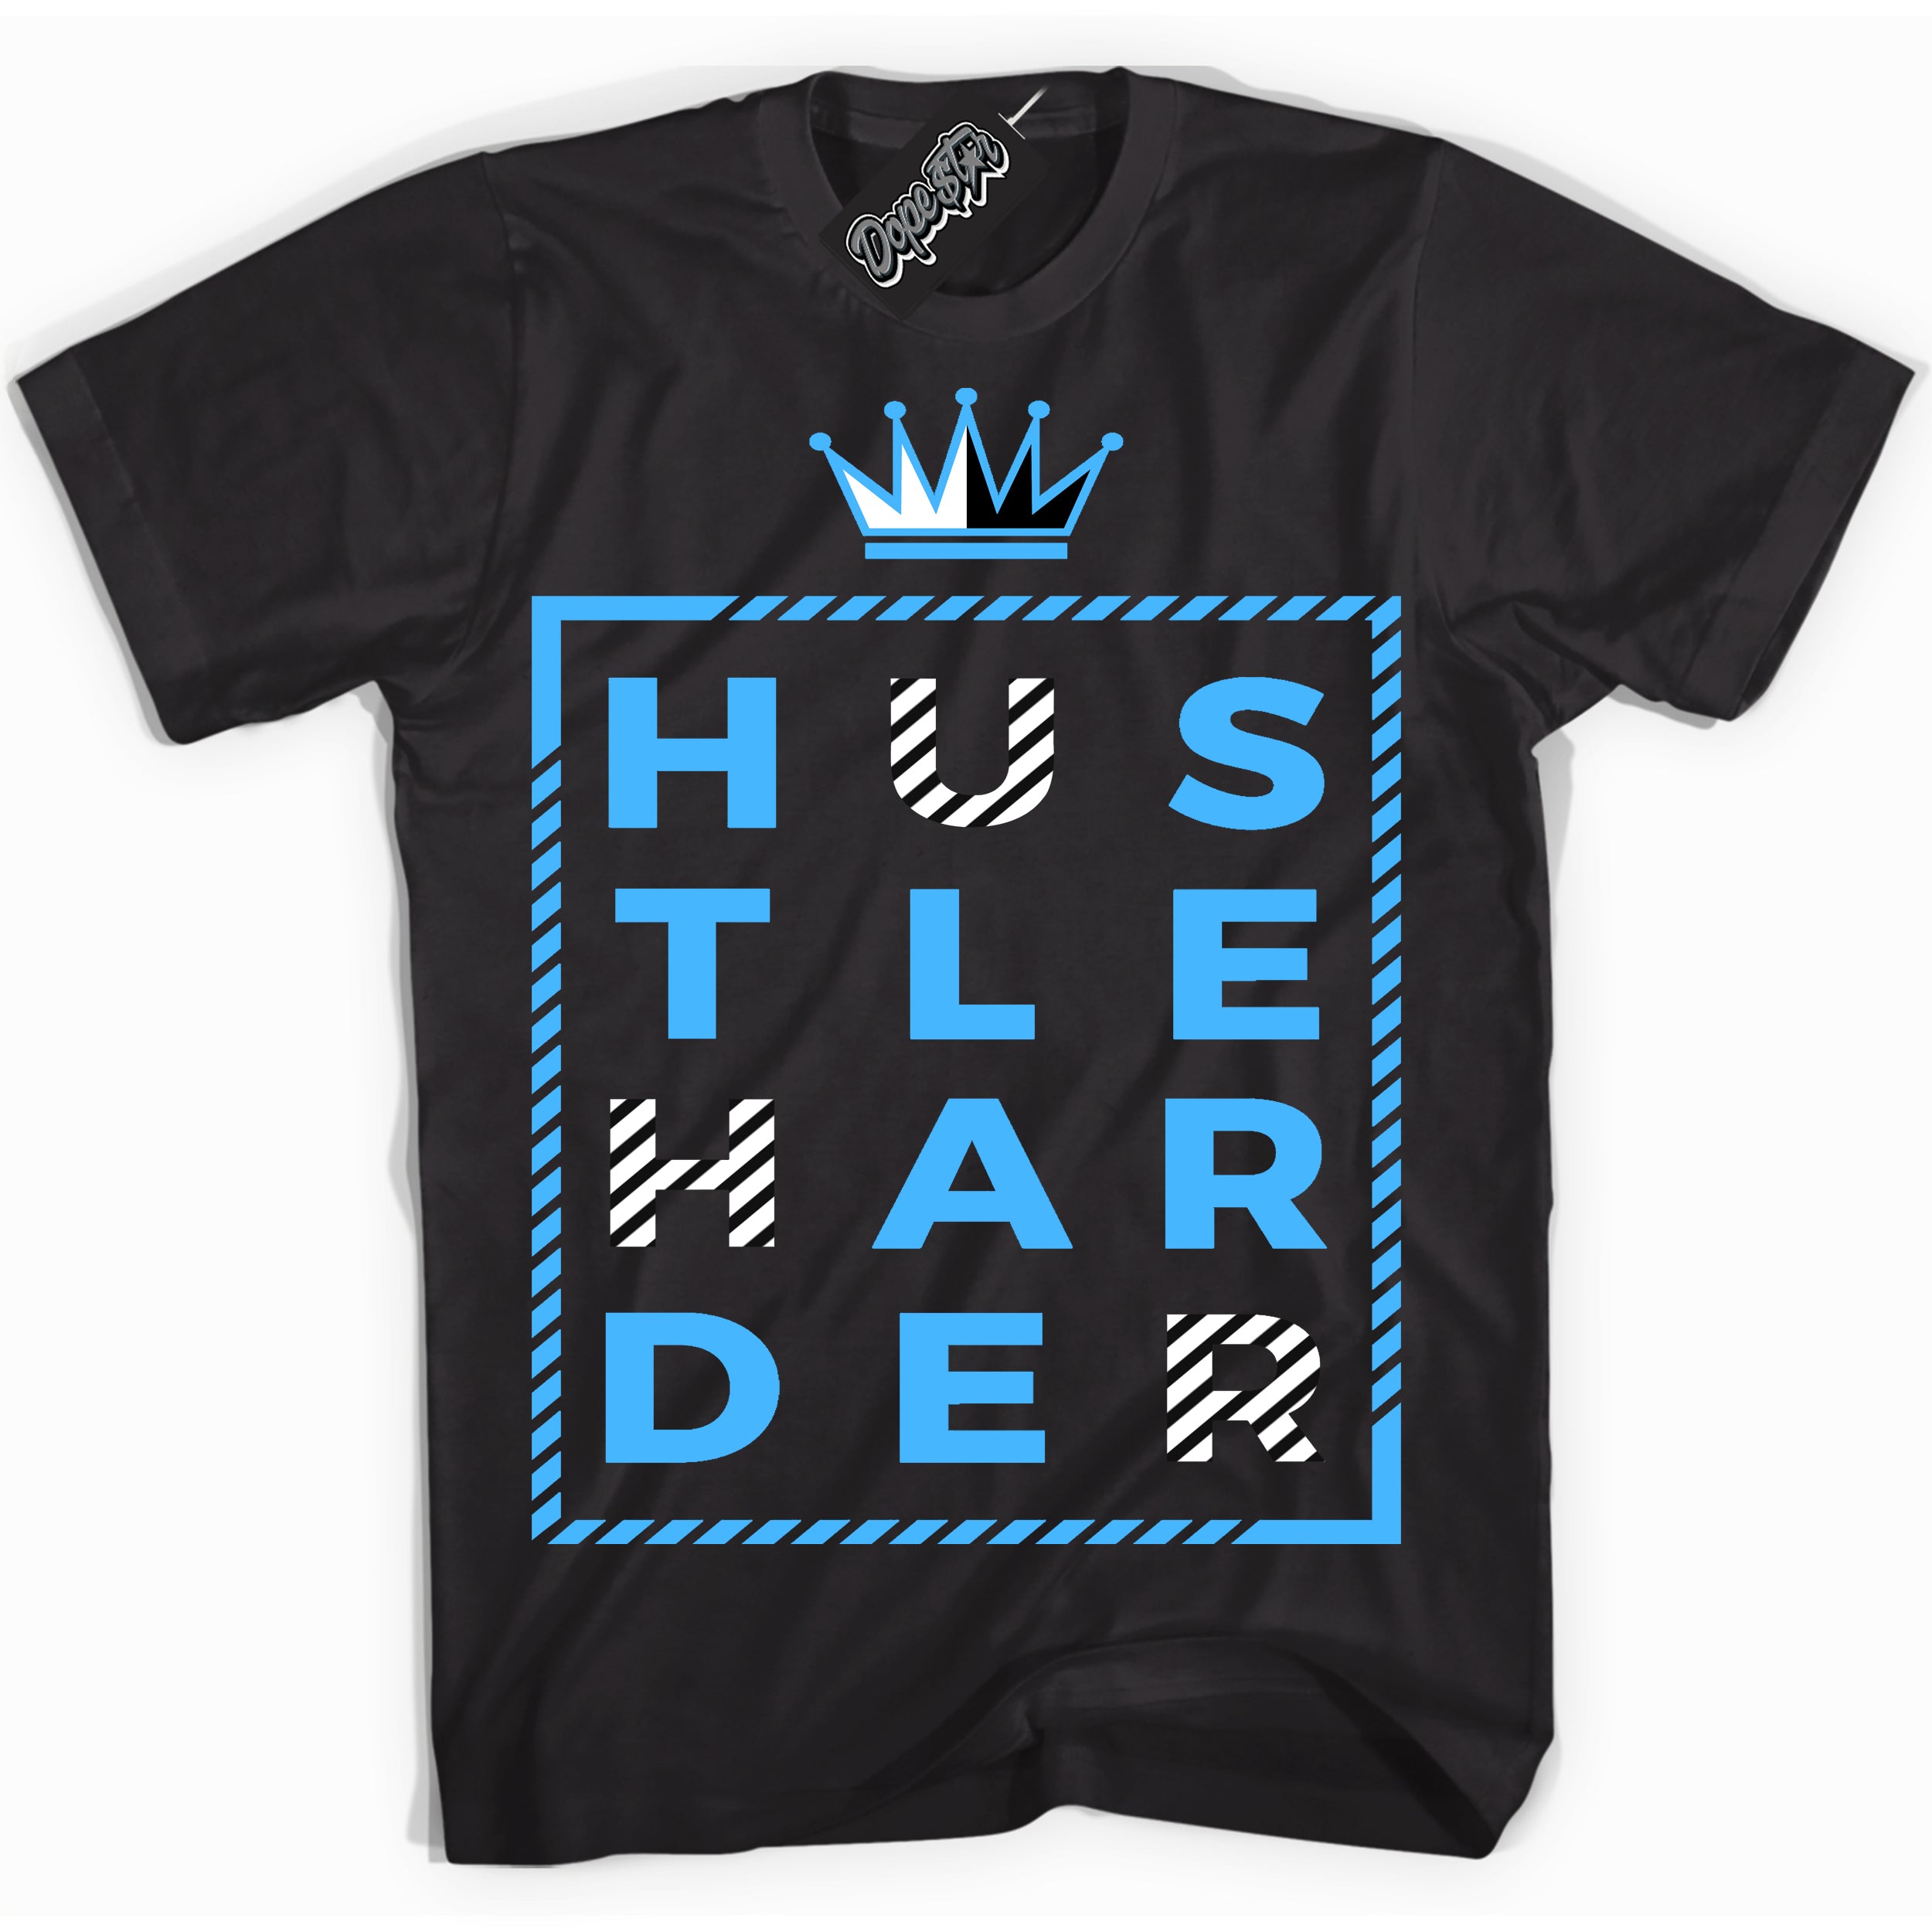 Cool Black graphic tee with “ Hustle Harder ” design, that perfectly matches Powder Blue 9s sneakers 